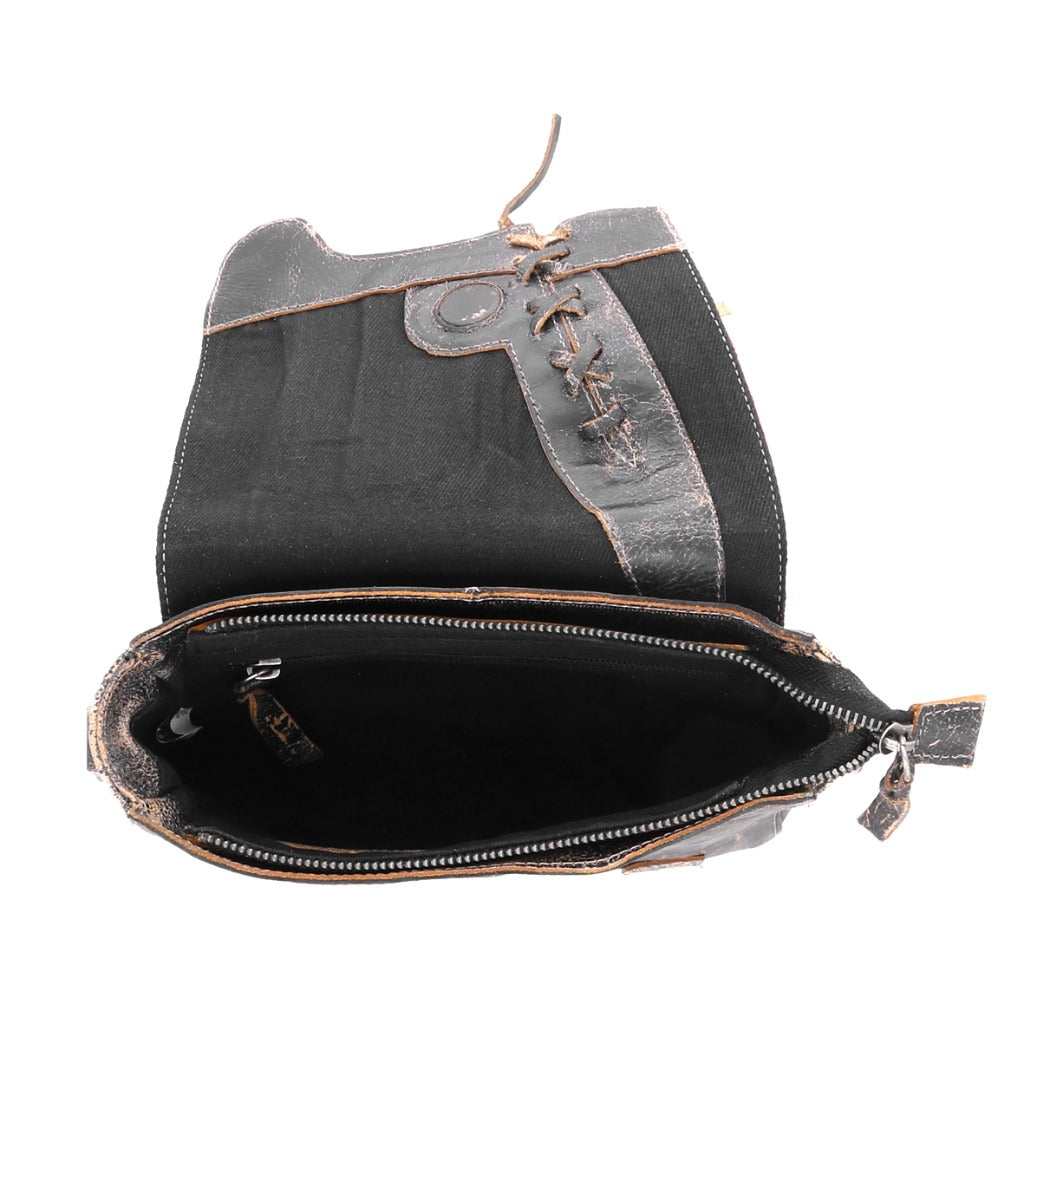 Ladies Leather Hand Purse | Small Hand Leather Sling Bag for Women - Leather  Bags - FOLKWAYS